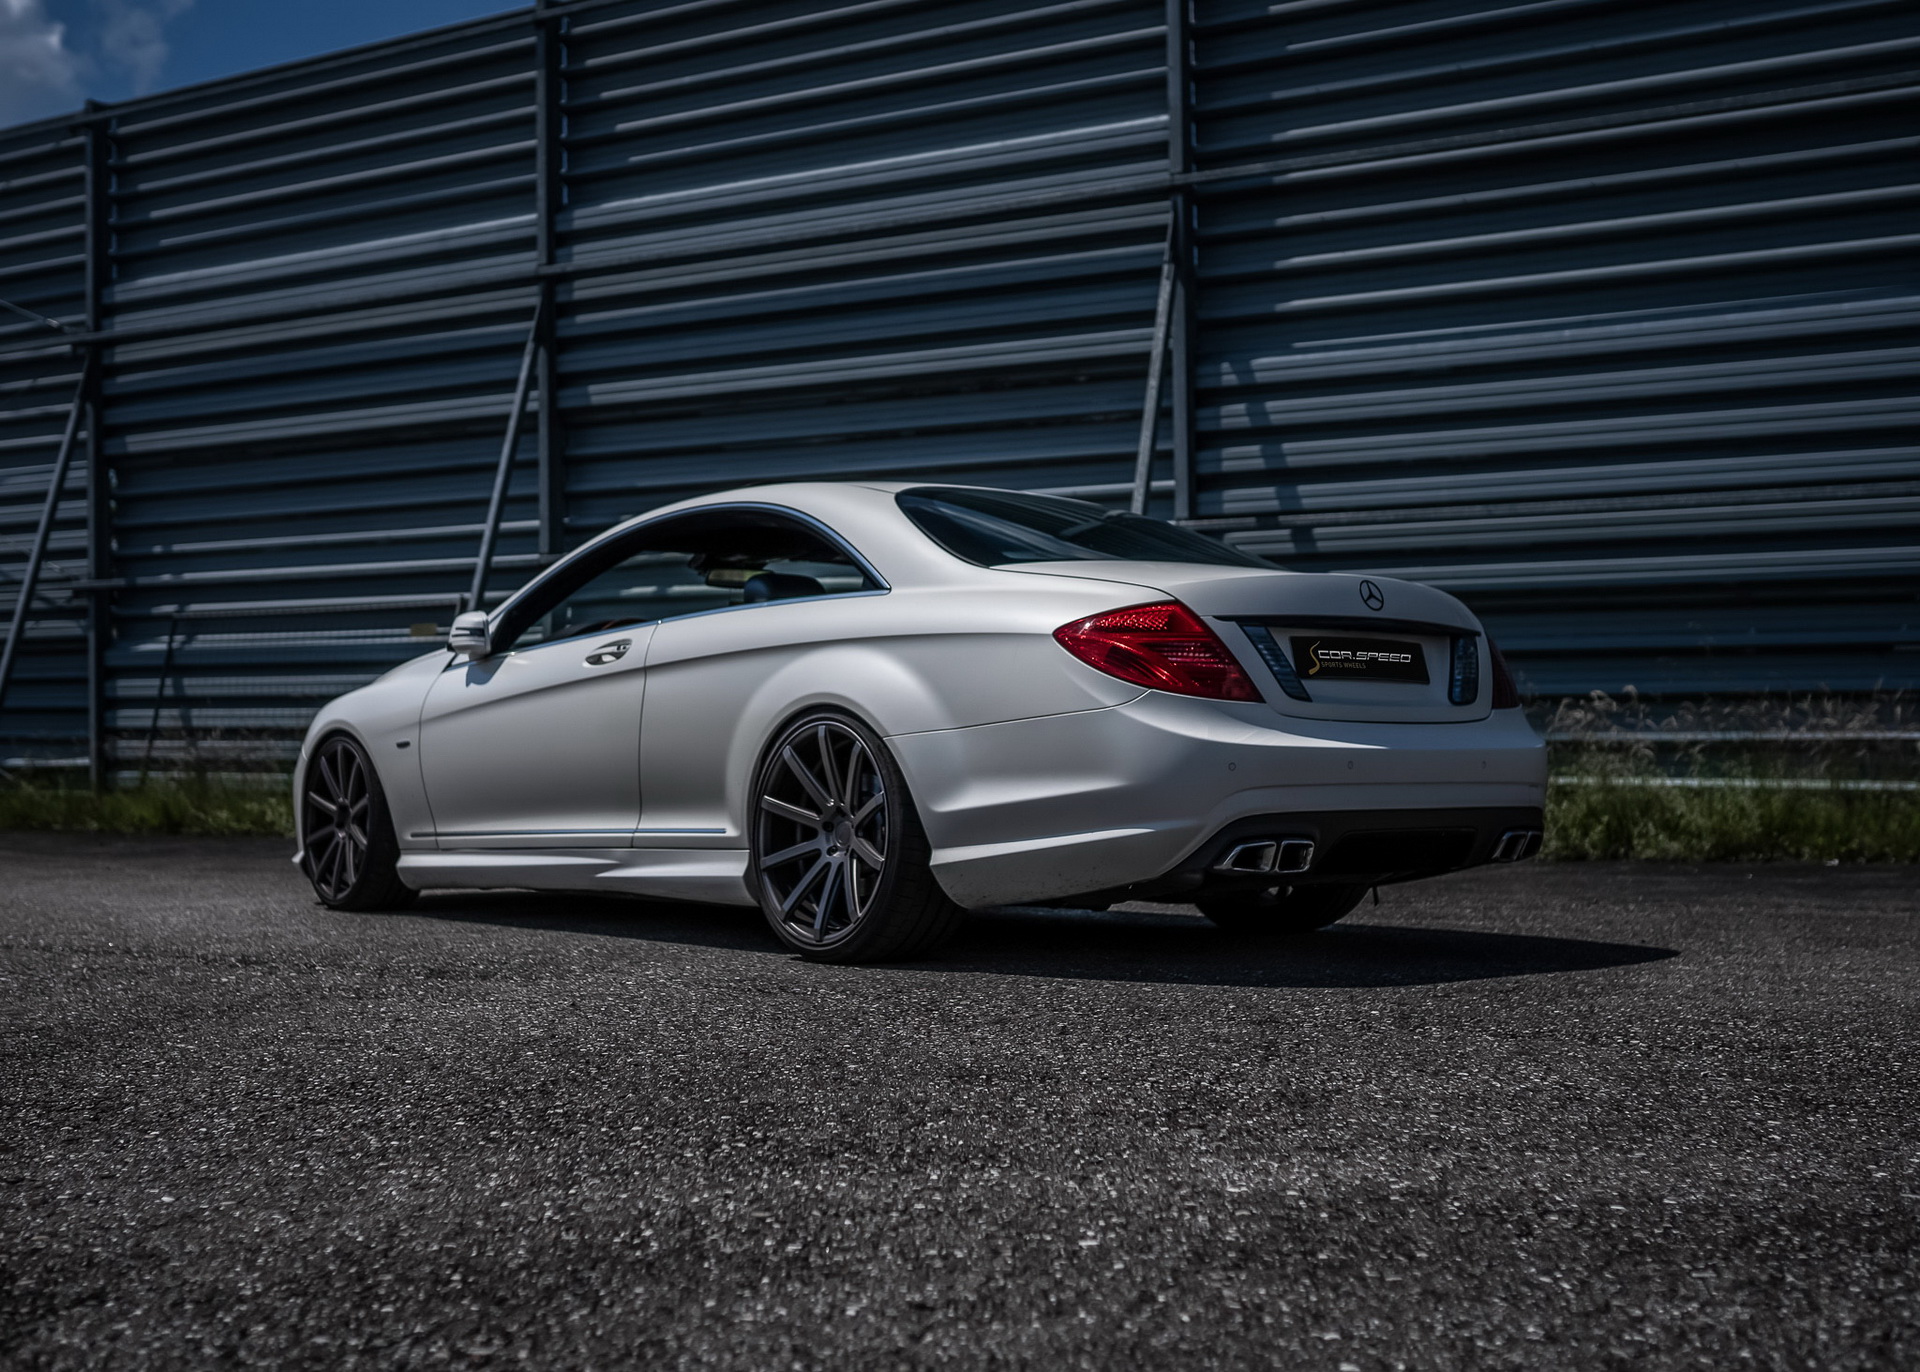 Mercedes Benz Cl 500 Gets A Revamp With Revised Stance New Wheels Carscoops